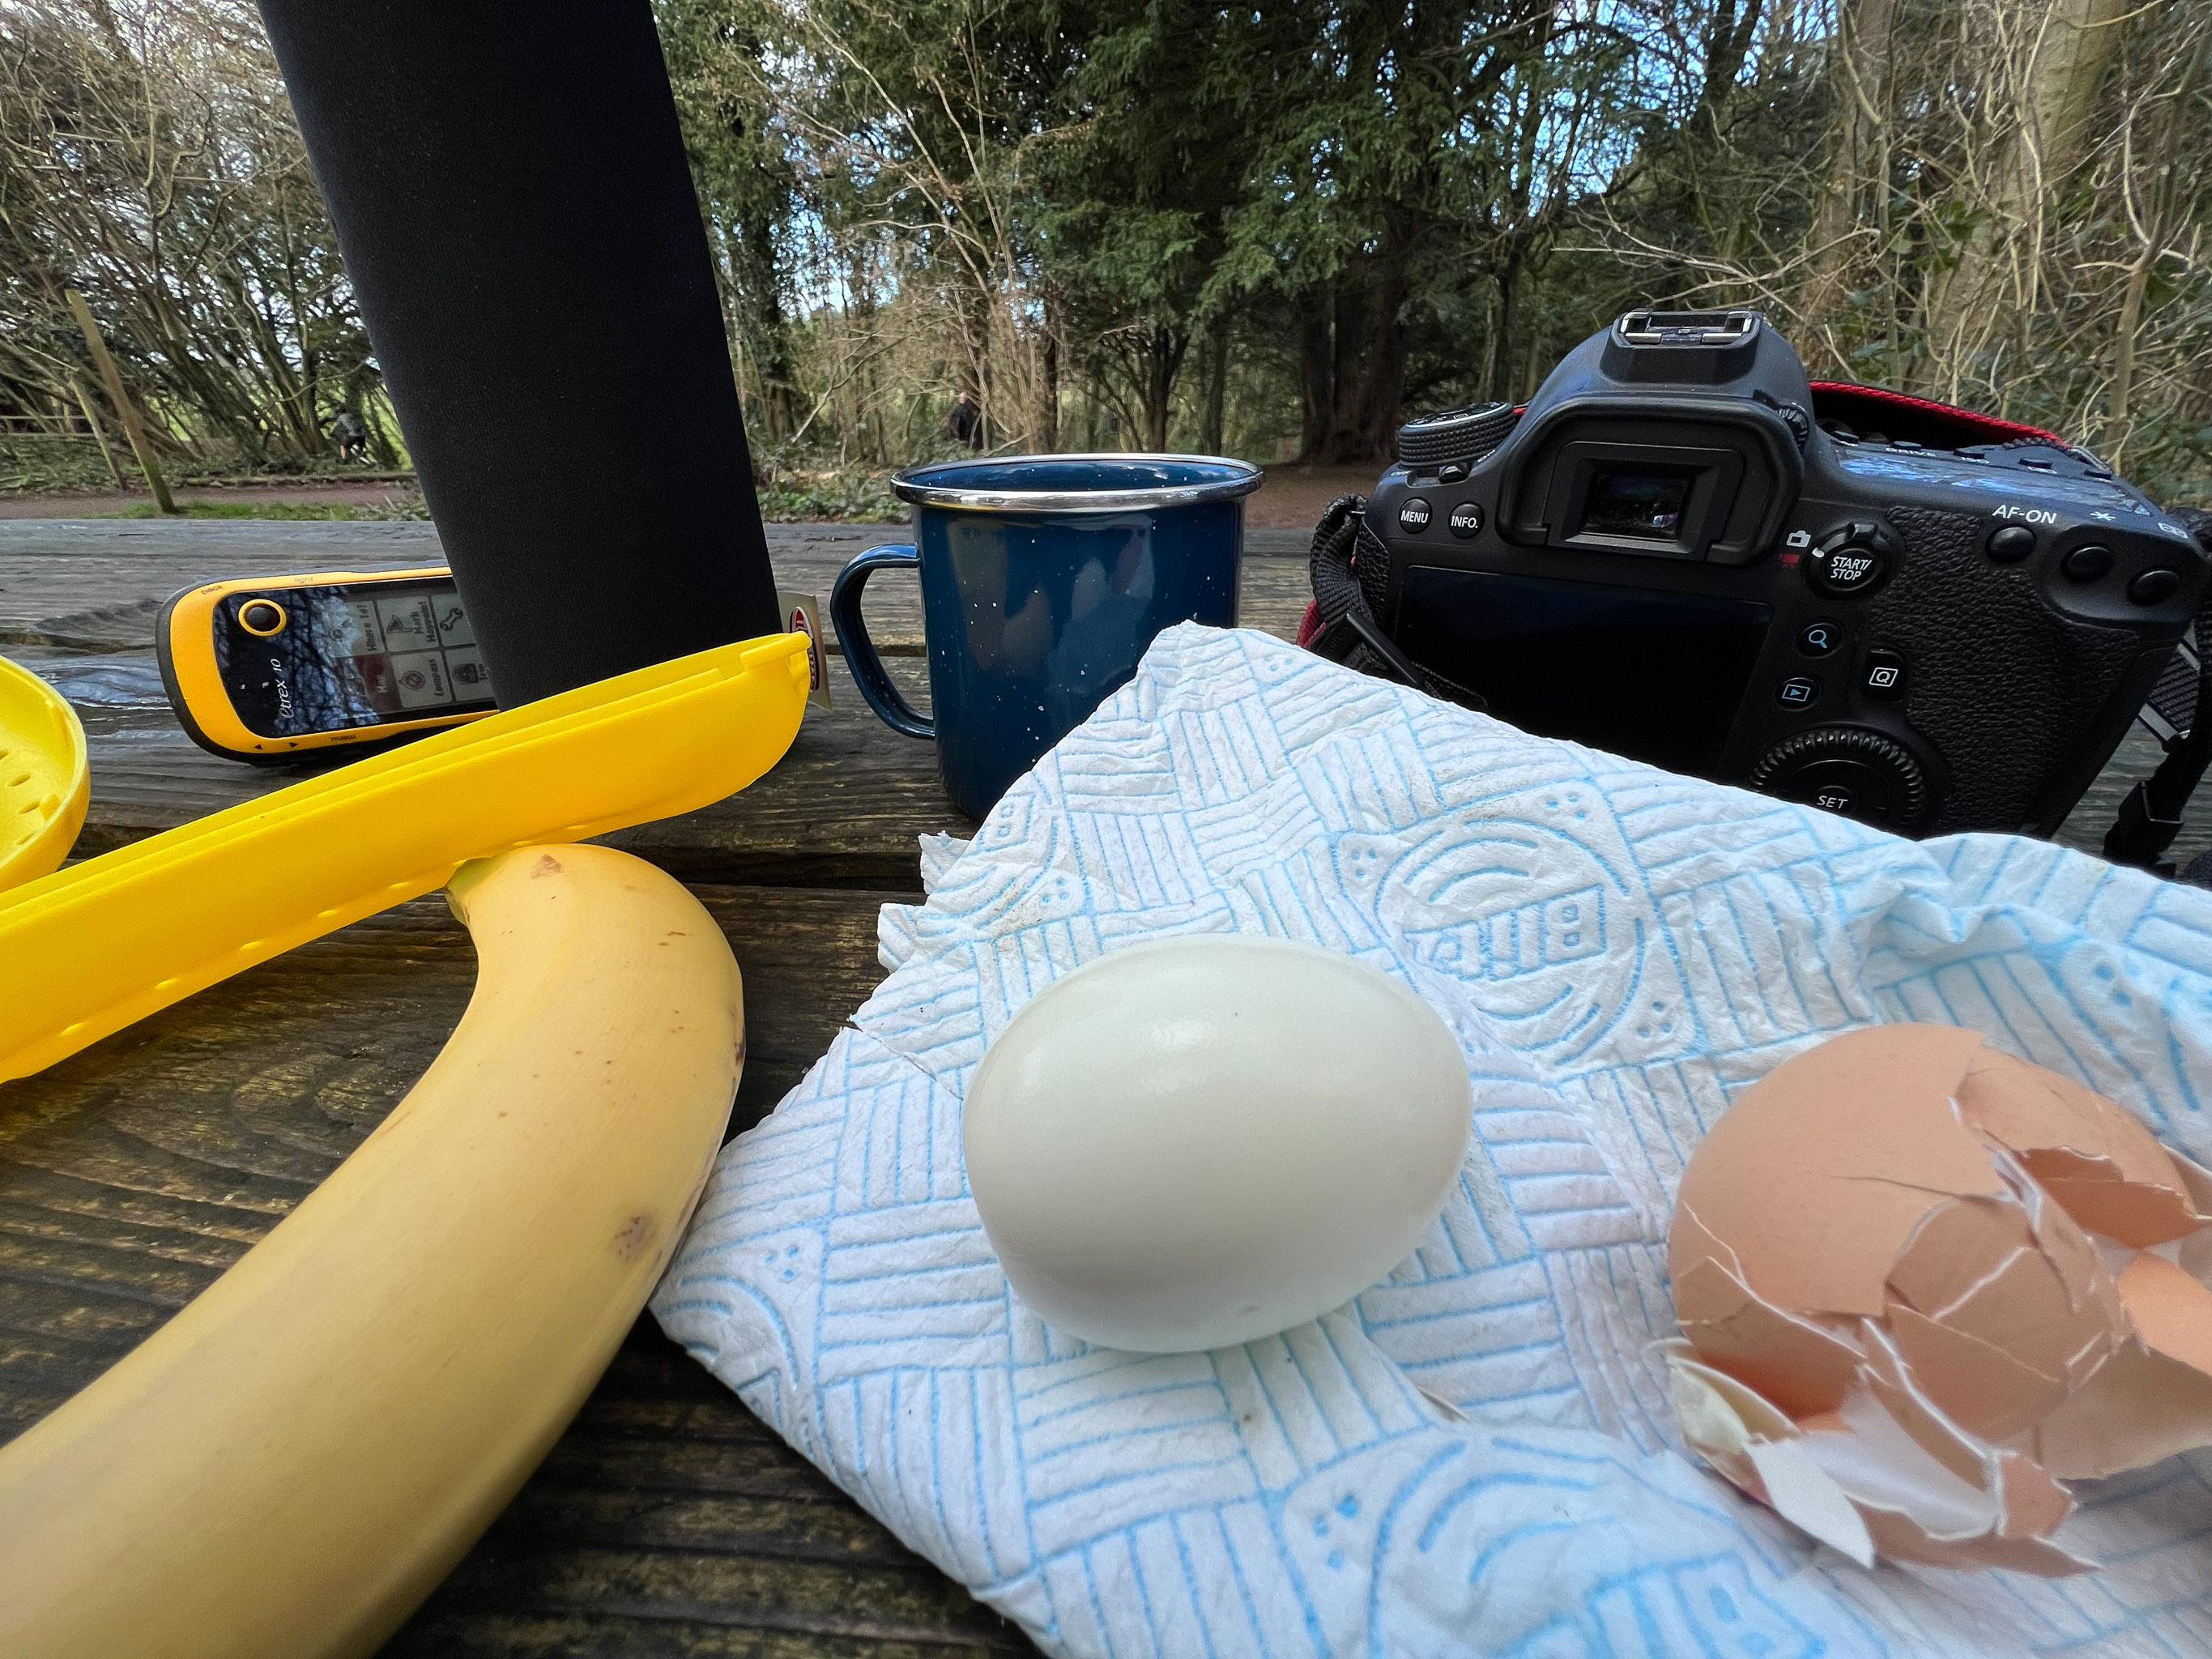 Snack
My food varies a bit on these forest walks, but I'm quite set in my ways on the drink: lapsang souchong, brewed straight in the Thermos flask at ho...